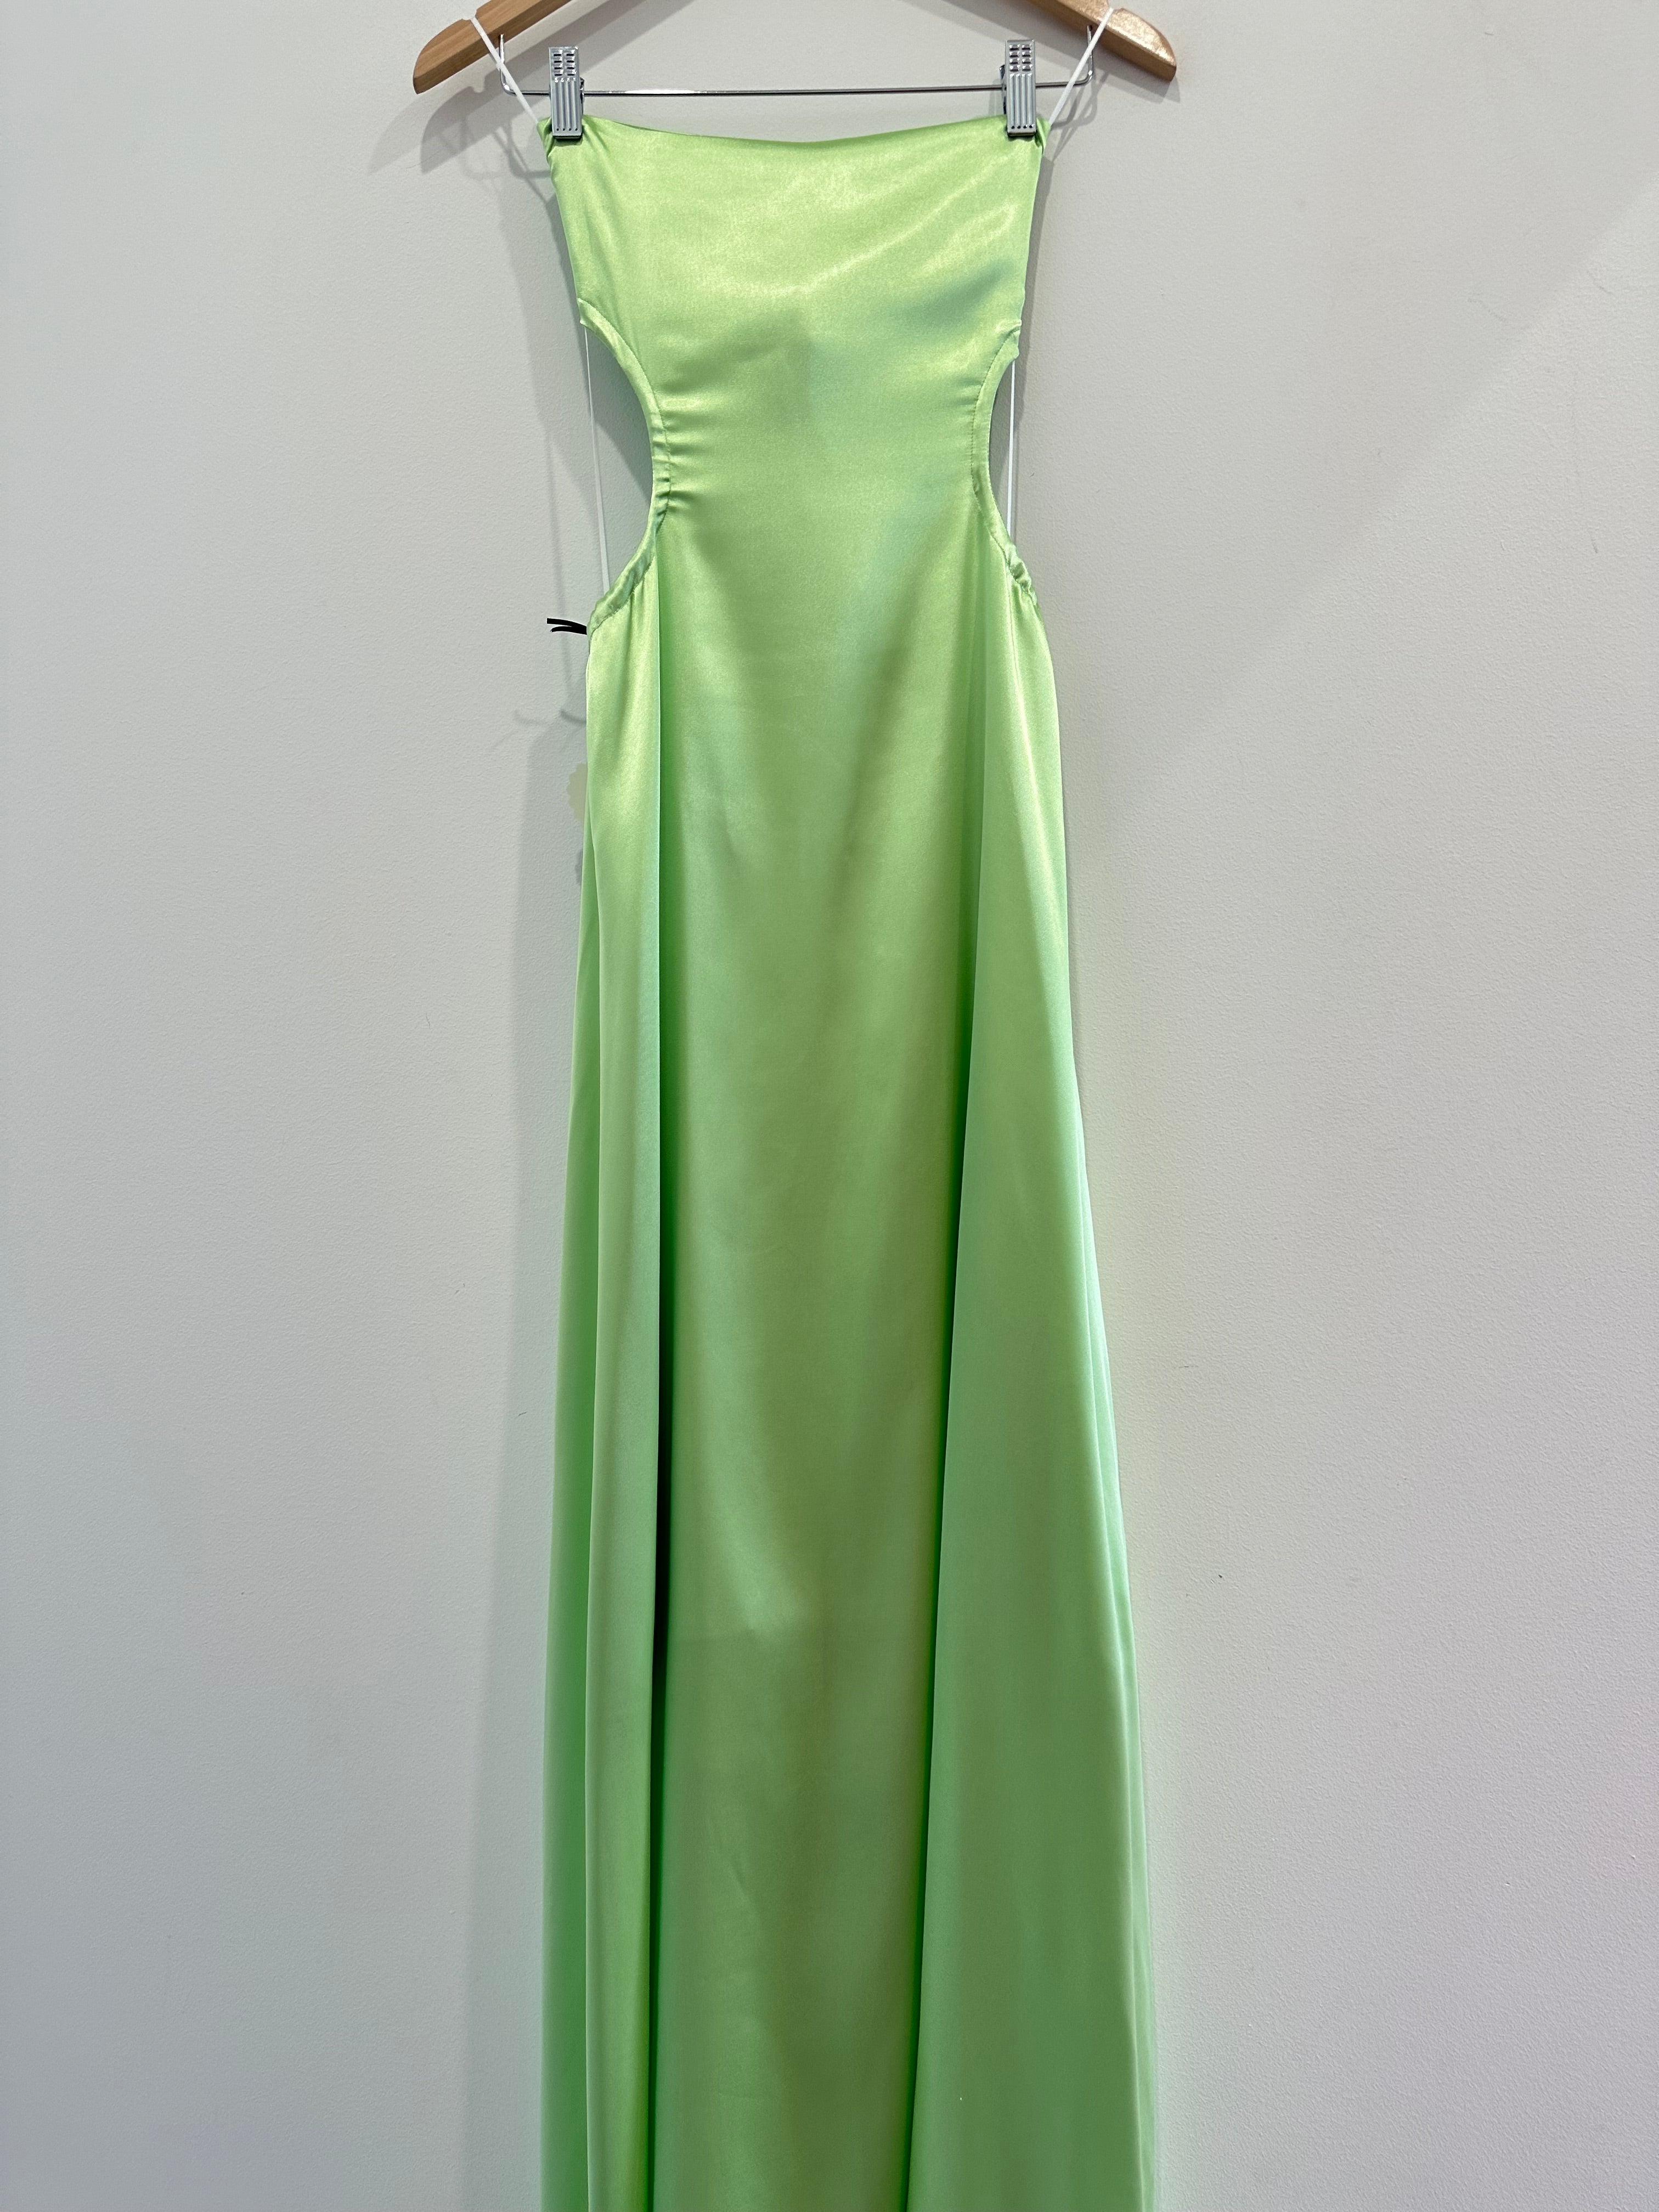 Luna Gown - FOR SALE